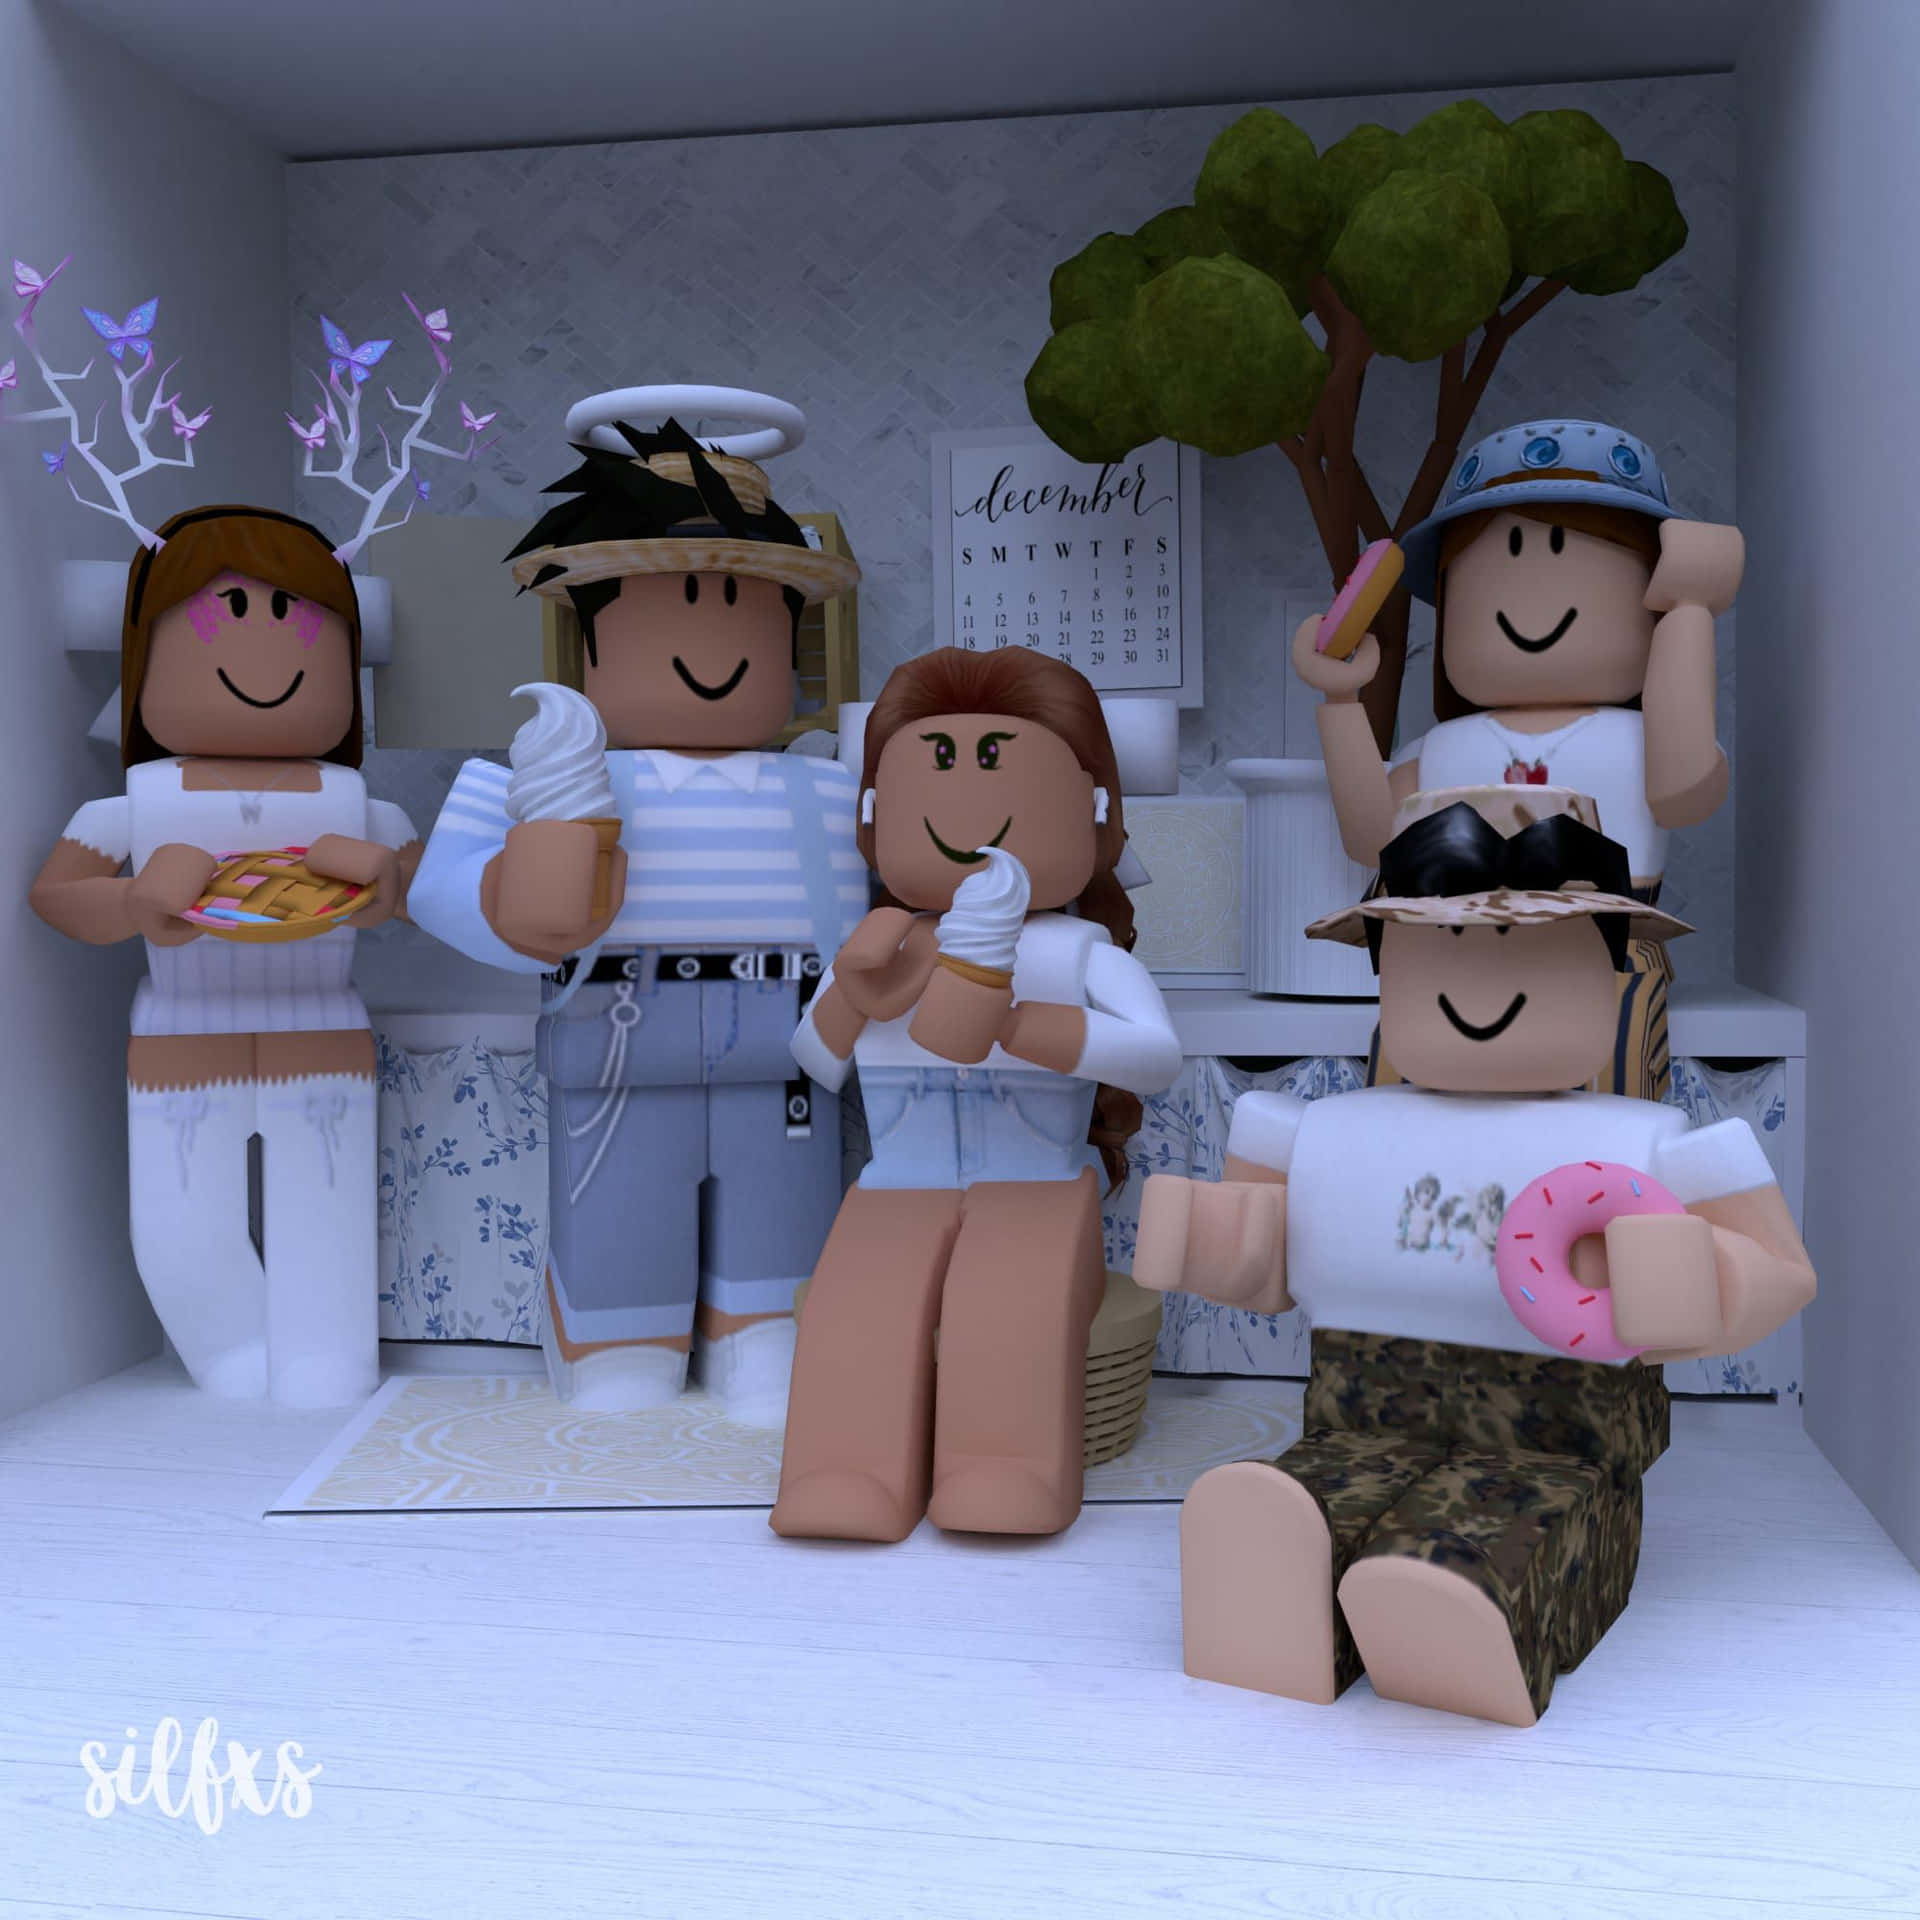 "Be the best BFFs -- Dress up and play together on Roblox!"